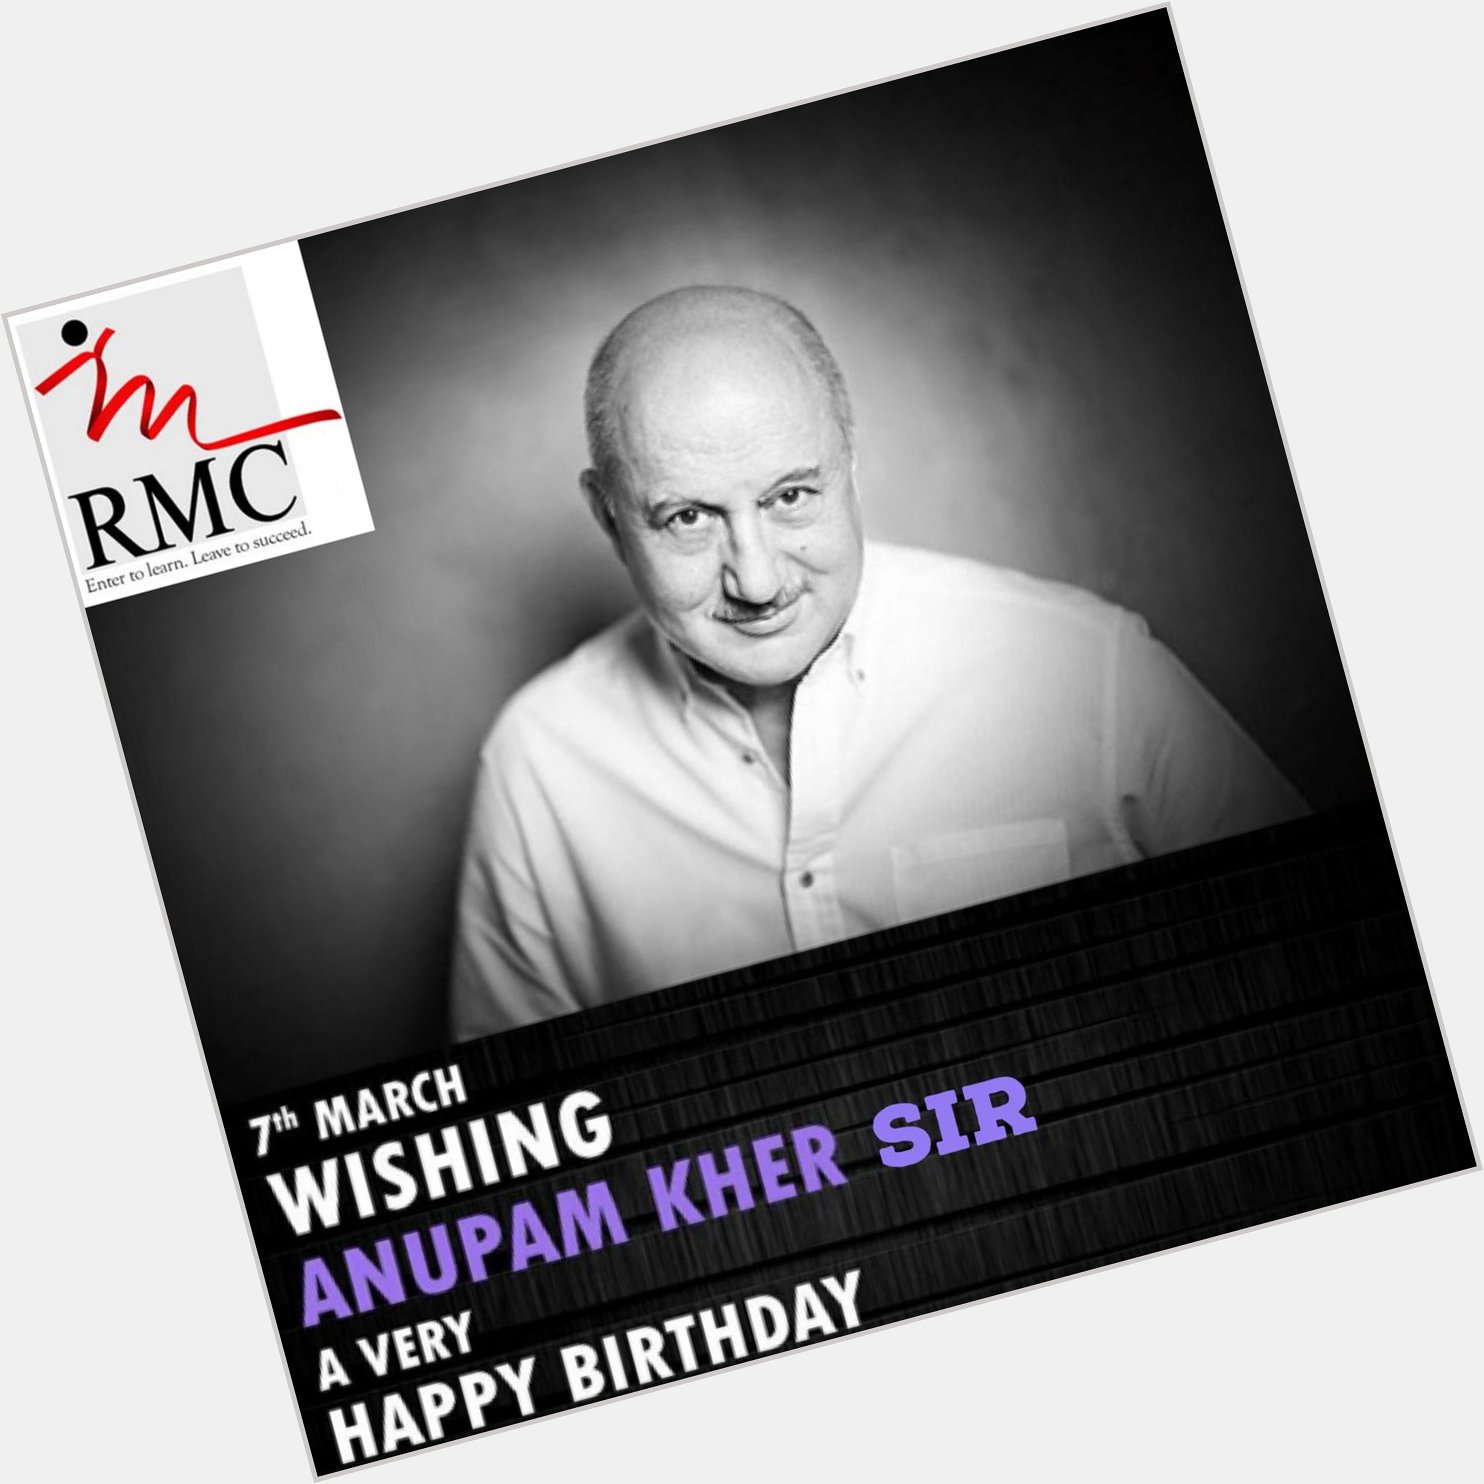 RMC Wishes Anupam Kher Sir a very Happy Birthday.
.
. 